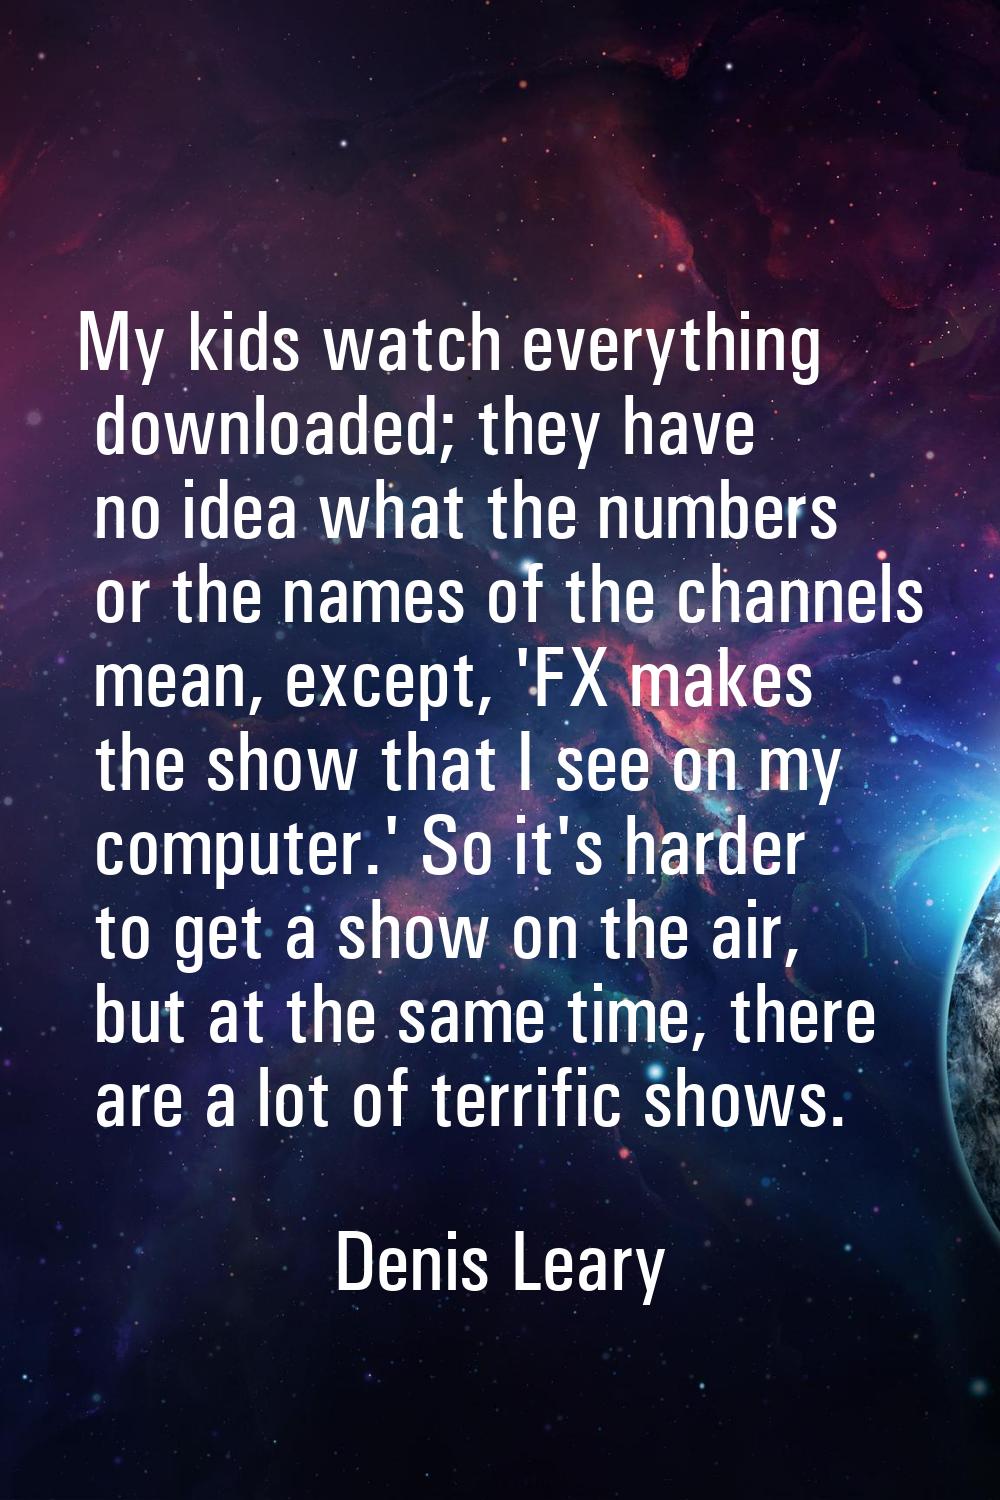 My kids watch everything downloaded; they have no idea what the numbers or the names of the channel